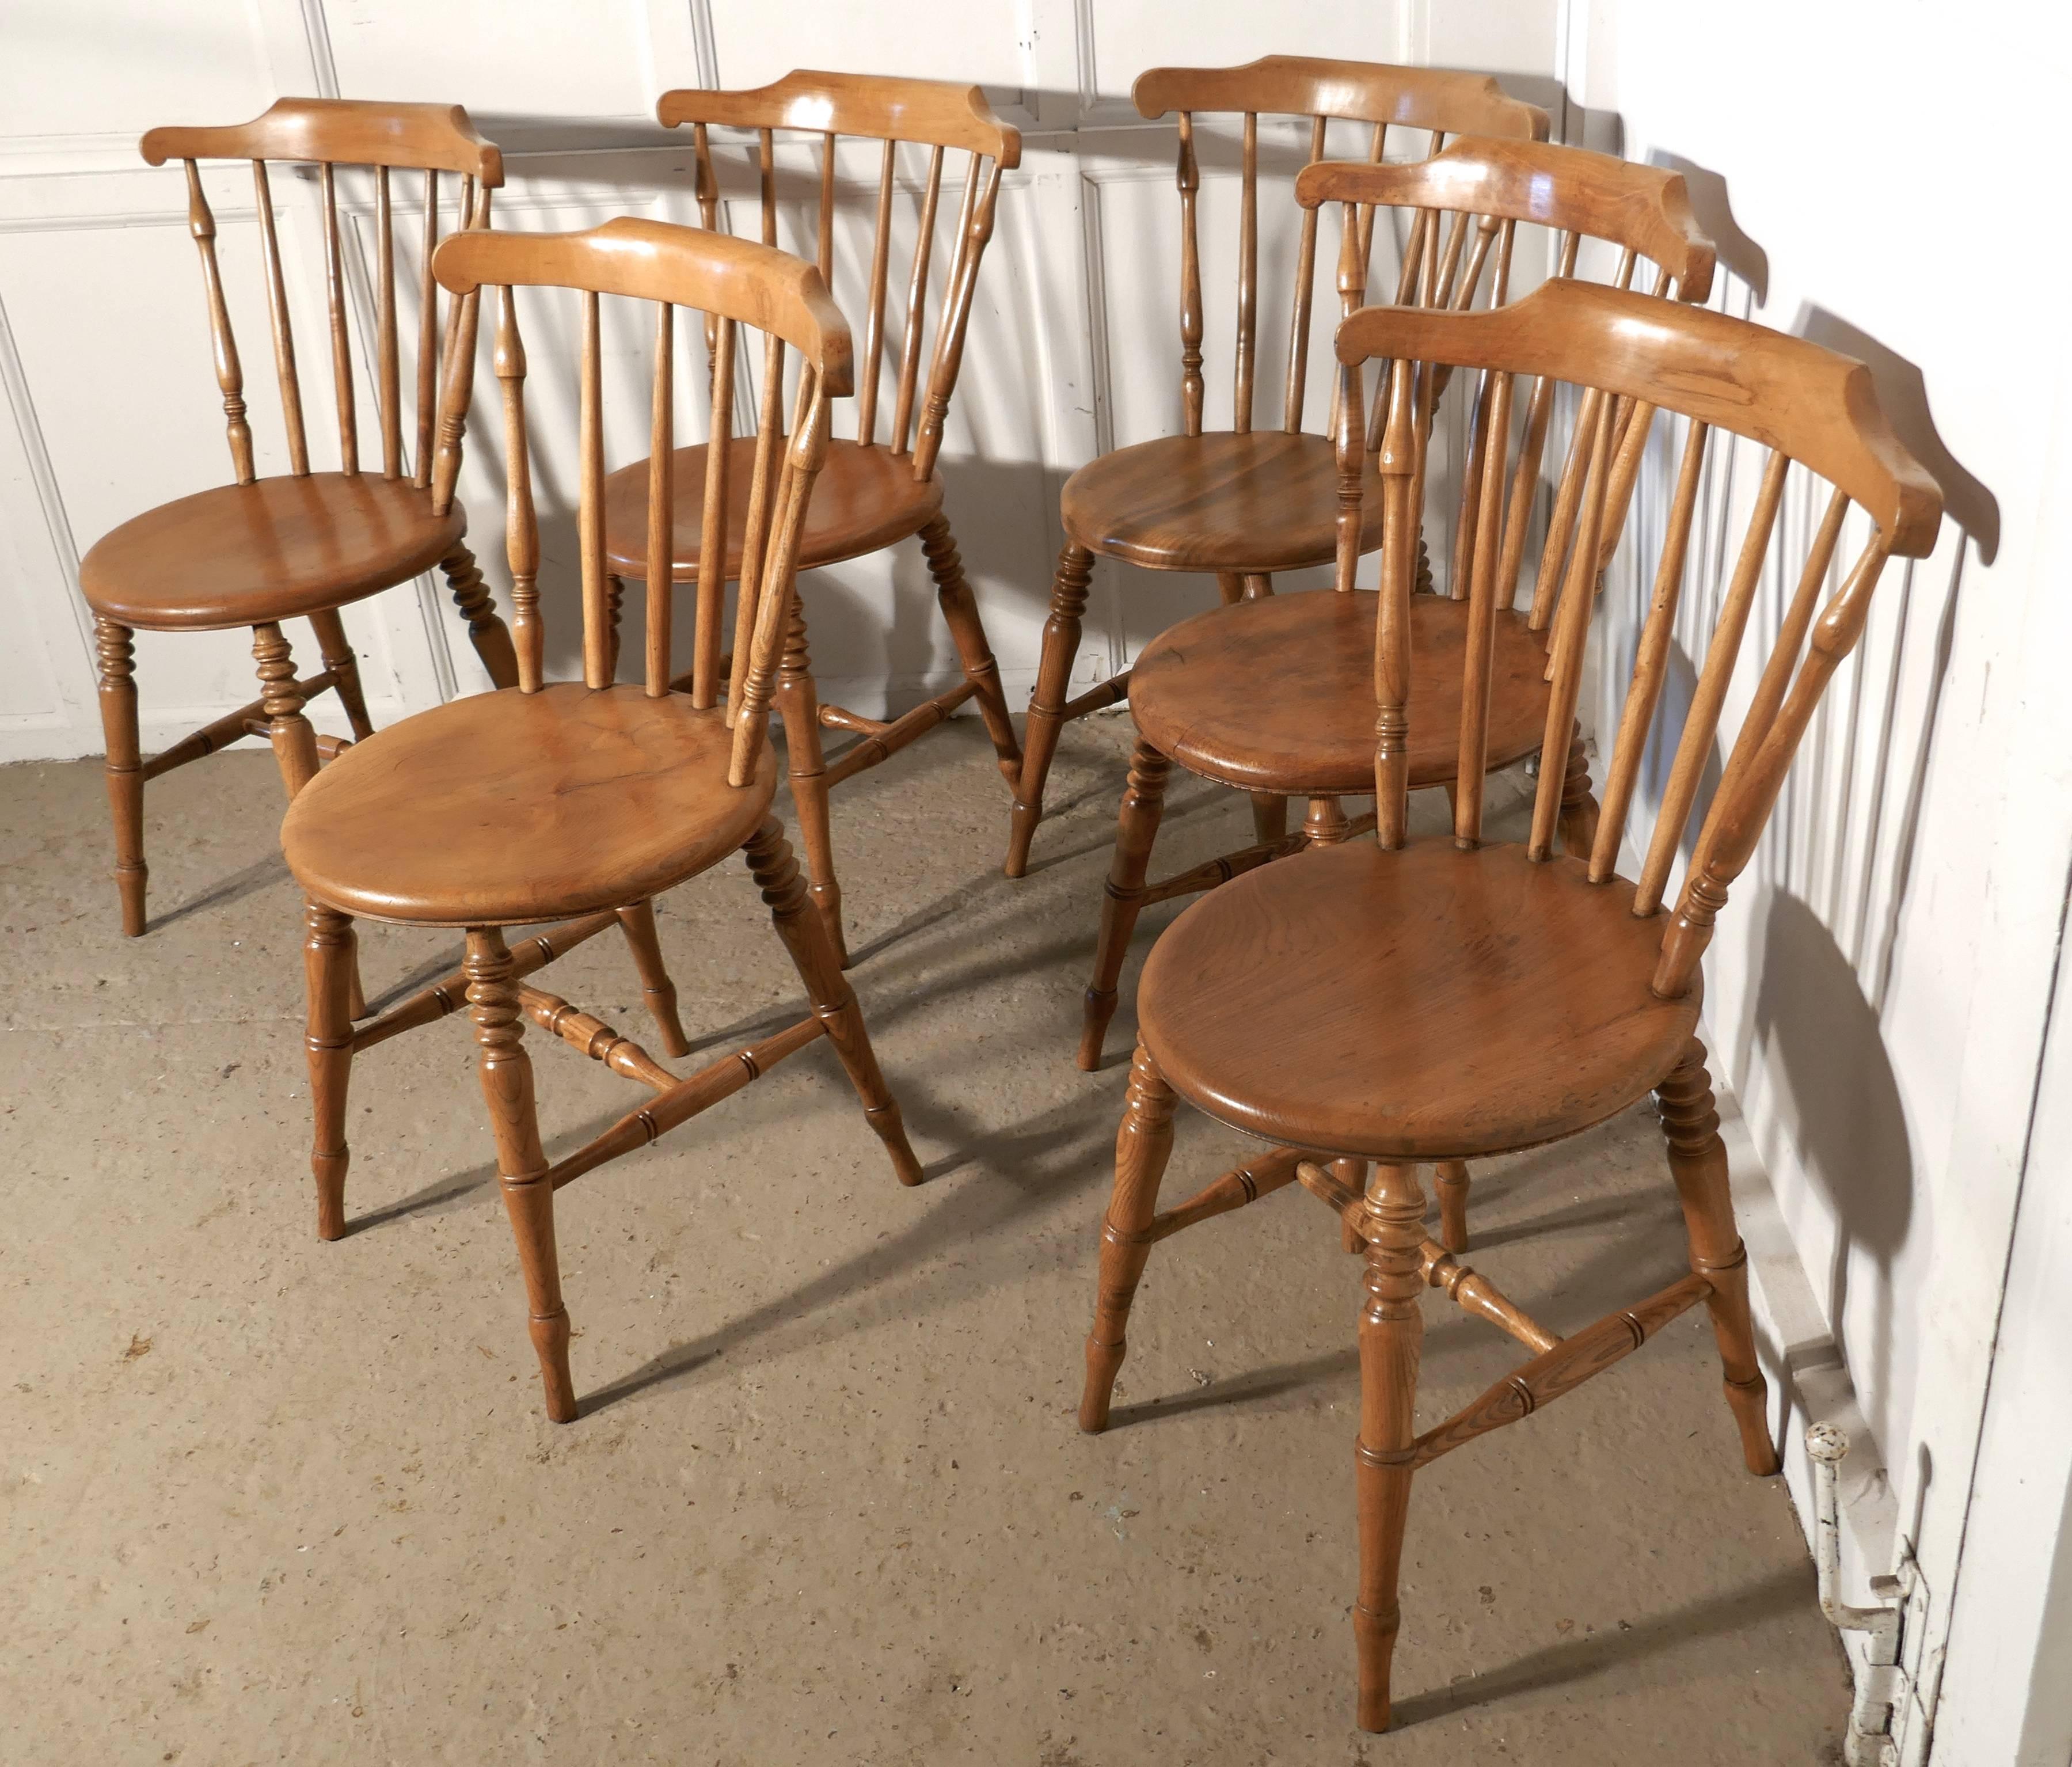 Hand-Crafted Set of Six Beech and Ash Country Kitchen Dining Chairs